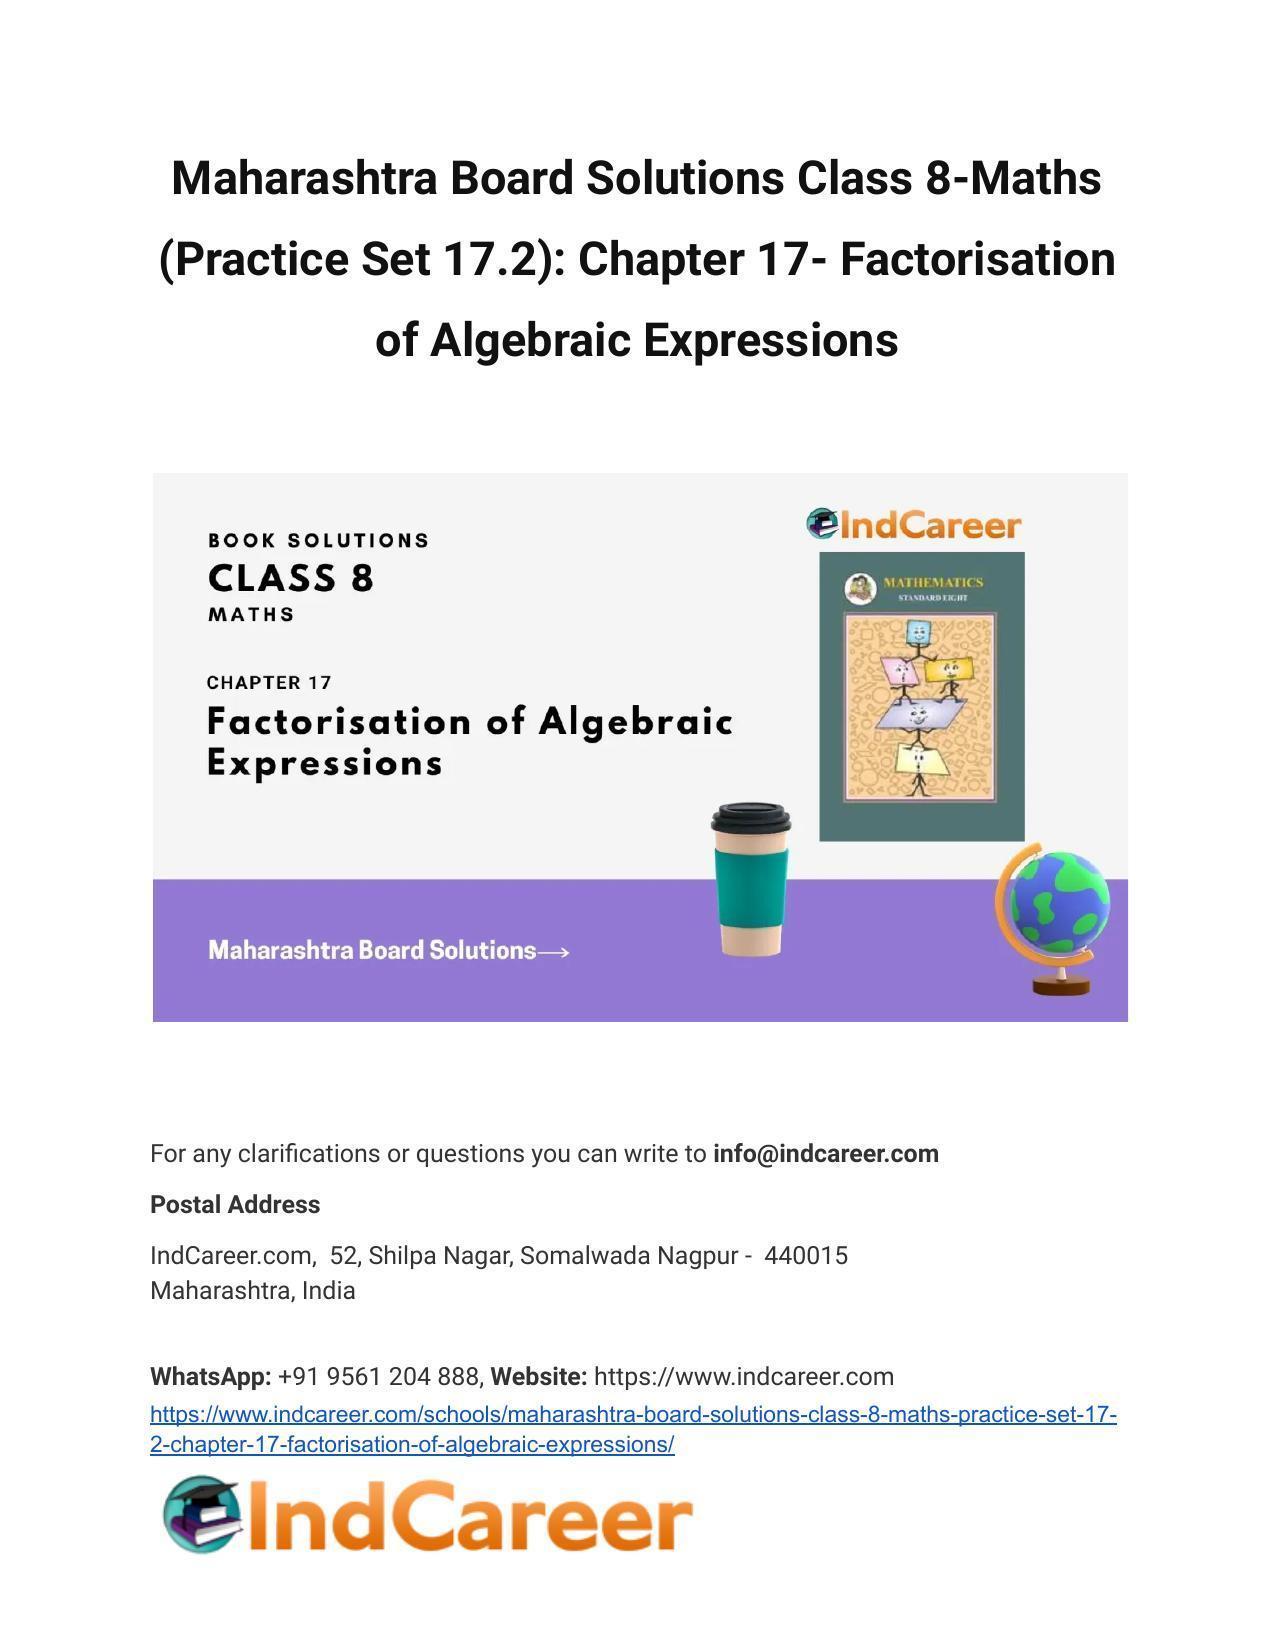 Maharashtra Board Solutions Class 8-Maths (Practice Set 17.2): Chapter 17- Factorisation of Algebraic Expressions - Page 1